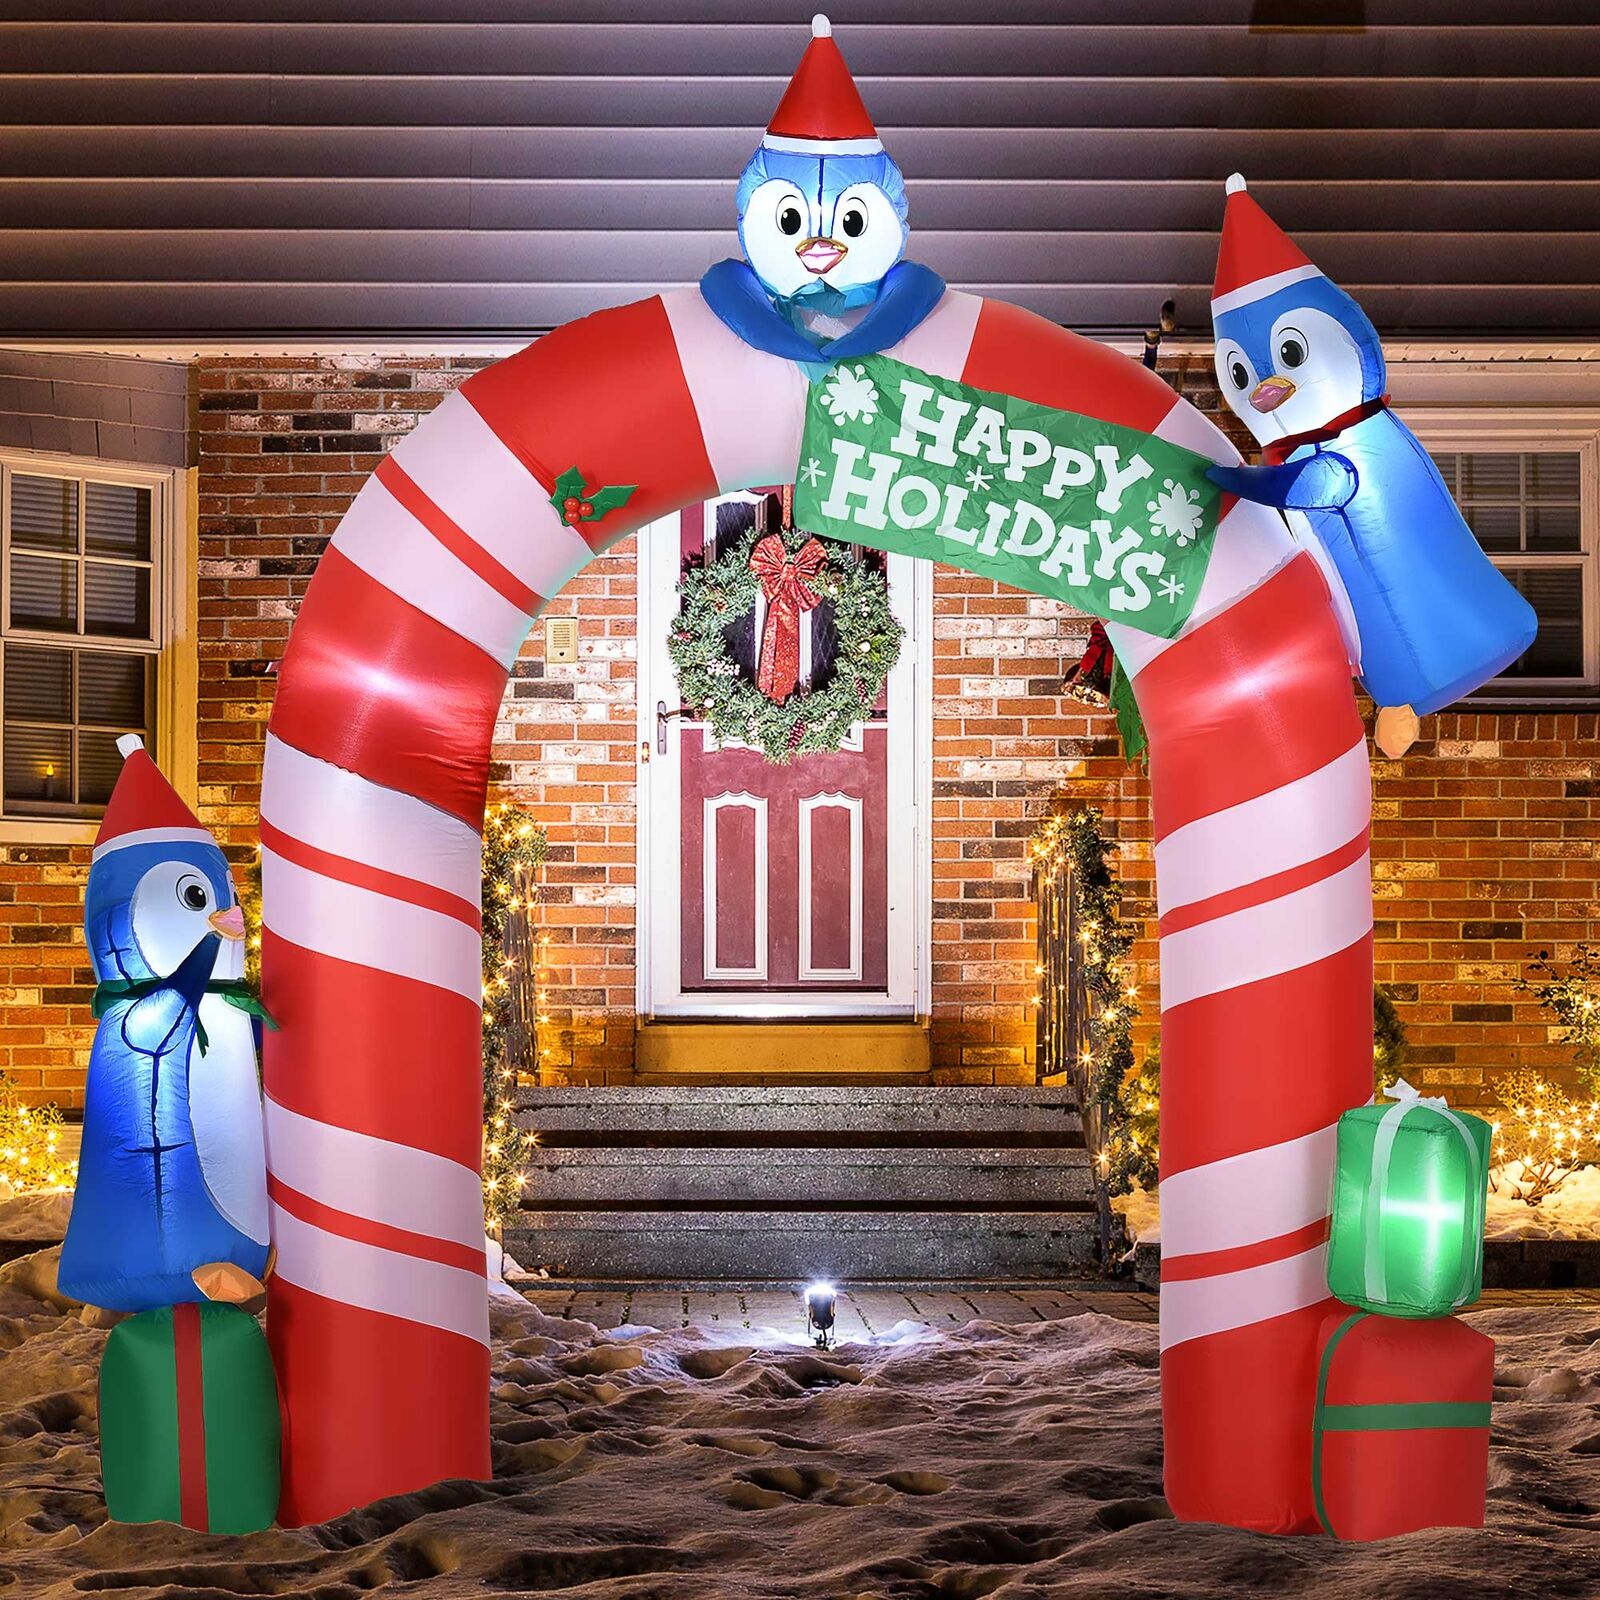 8ft Christmas Inflatable Candy Cane Archway w/ Three Penguins and Gift Boxes